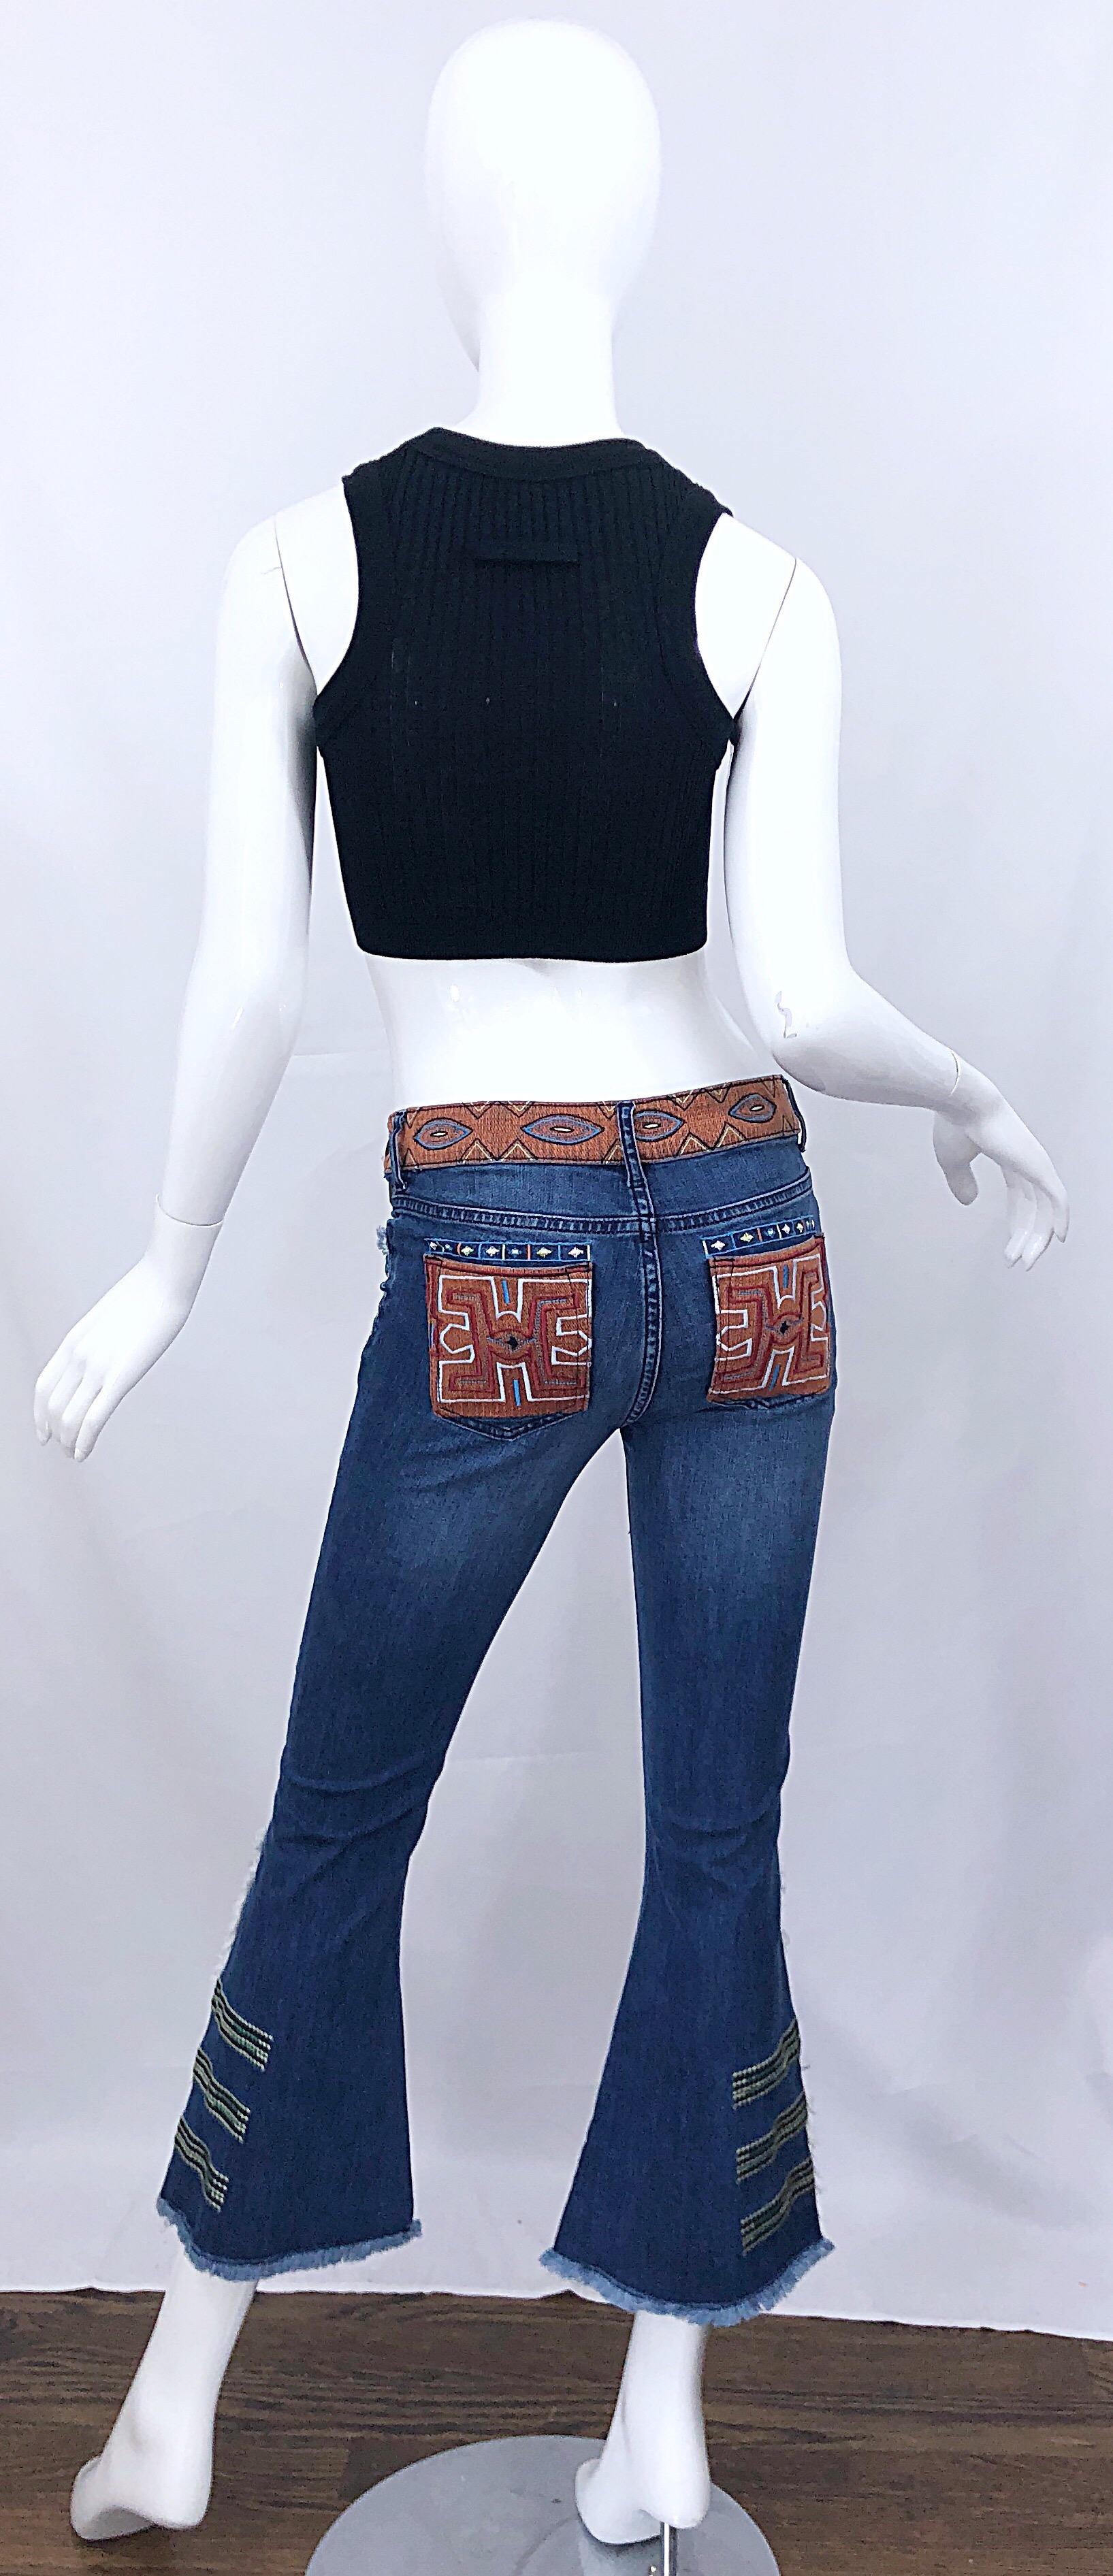 Rare brand new with tags early 2000s vintage NICOLE MILLER ARTELIER low rise cropped flare leg raw edge denim culottes / blue jeans. Features intricate embroidery throughout in warm colors of orange, red, burnt orange, green, blue, purple, pink,